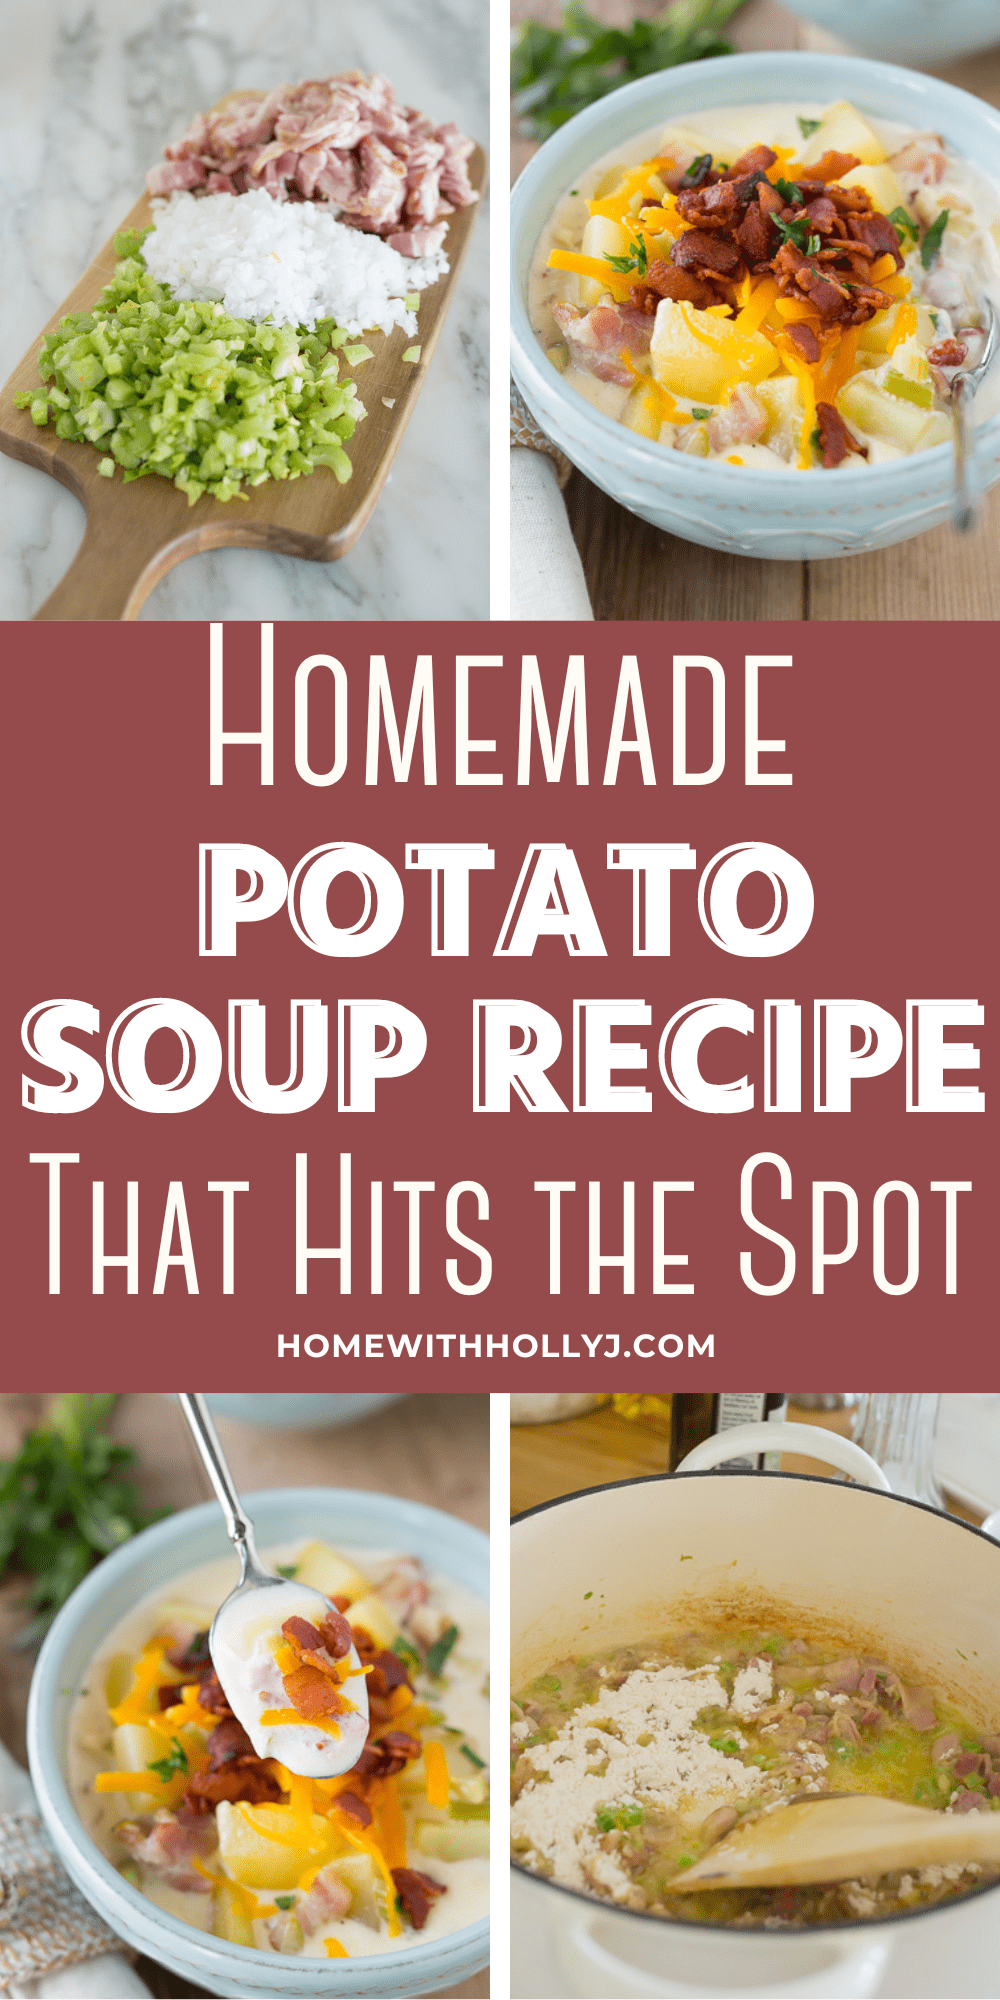 Indulge in a comforting bowl of homemade potato soup with our delicious recipe that is sure to please. Get the recipe here.